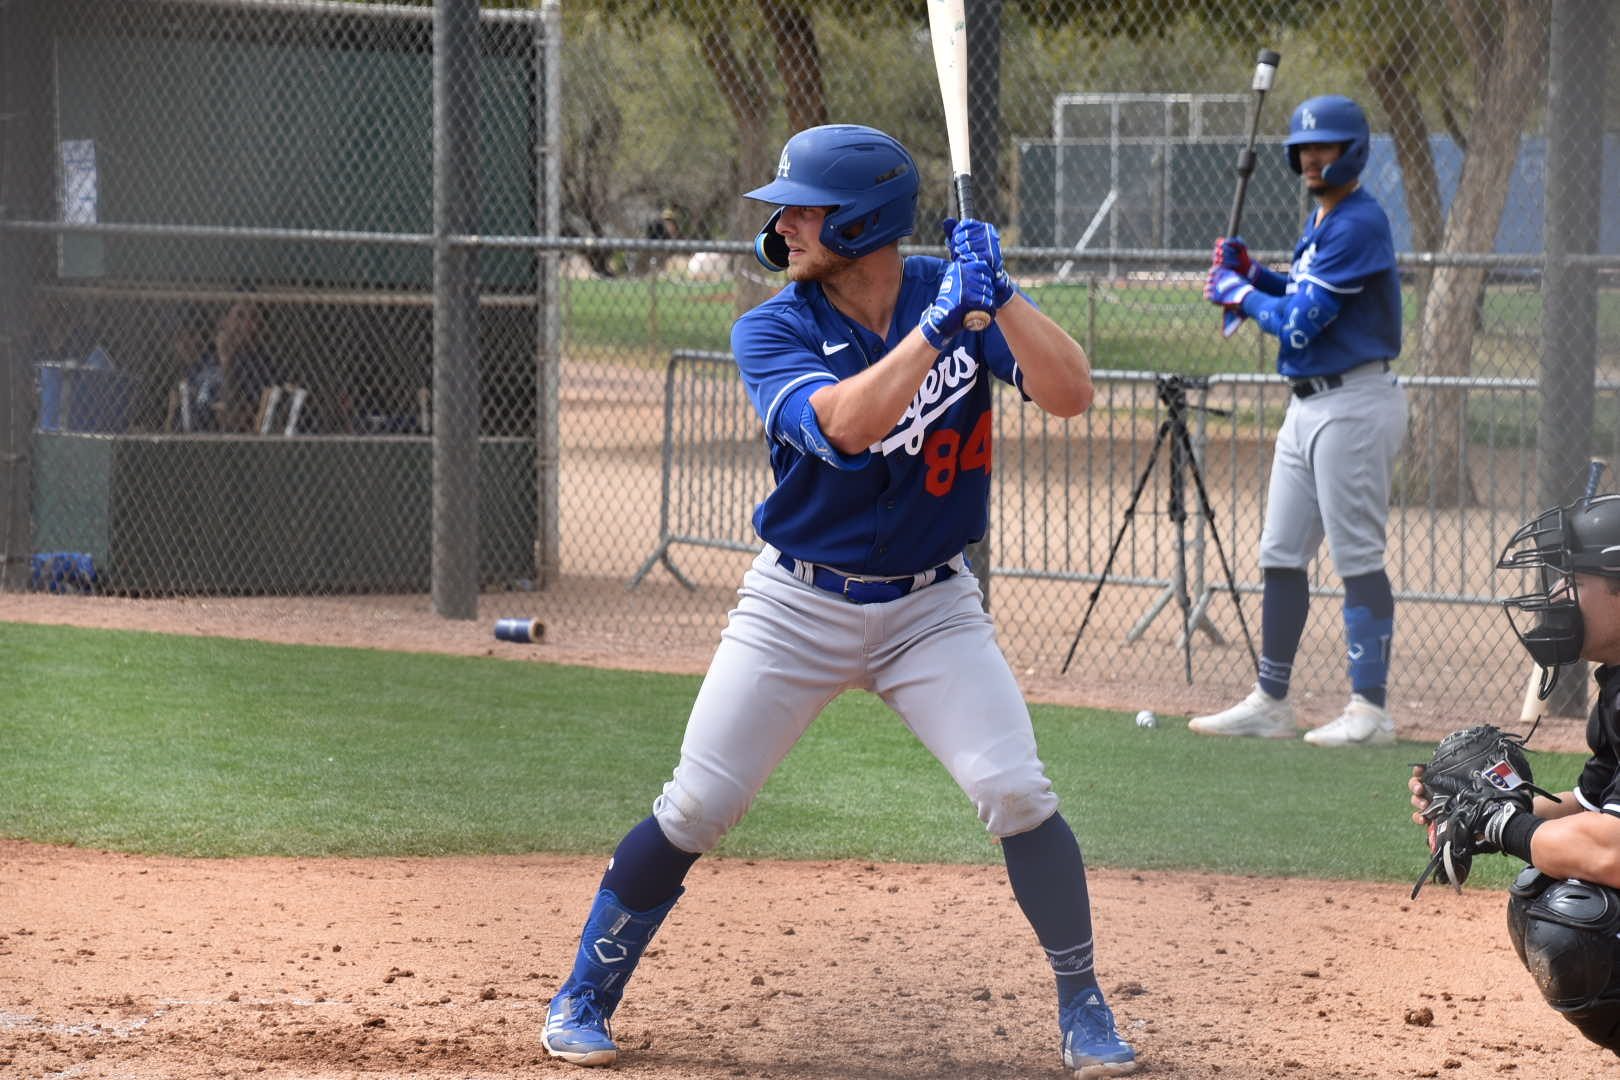 Dodgers Prospect Michael Busch is Tearing Up Minor League Pitching